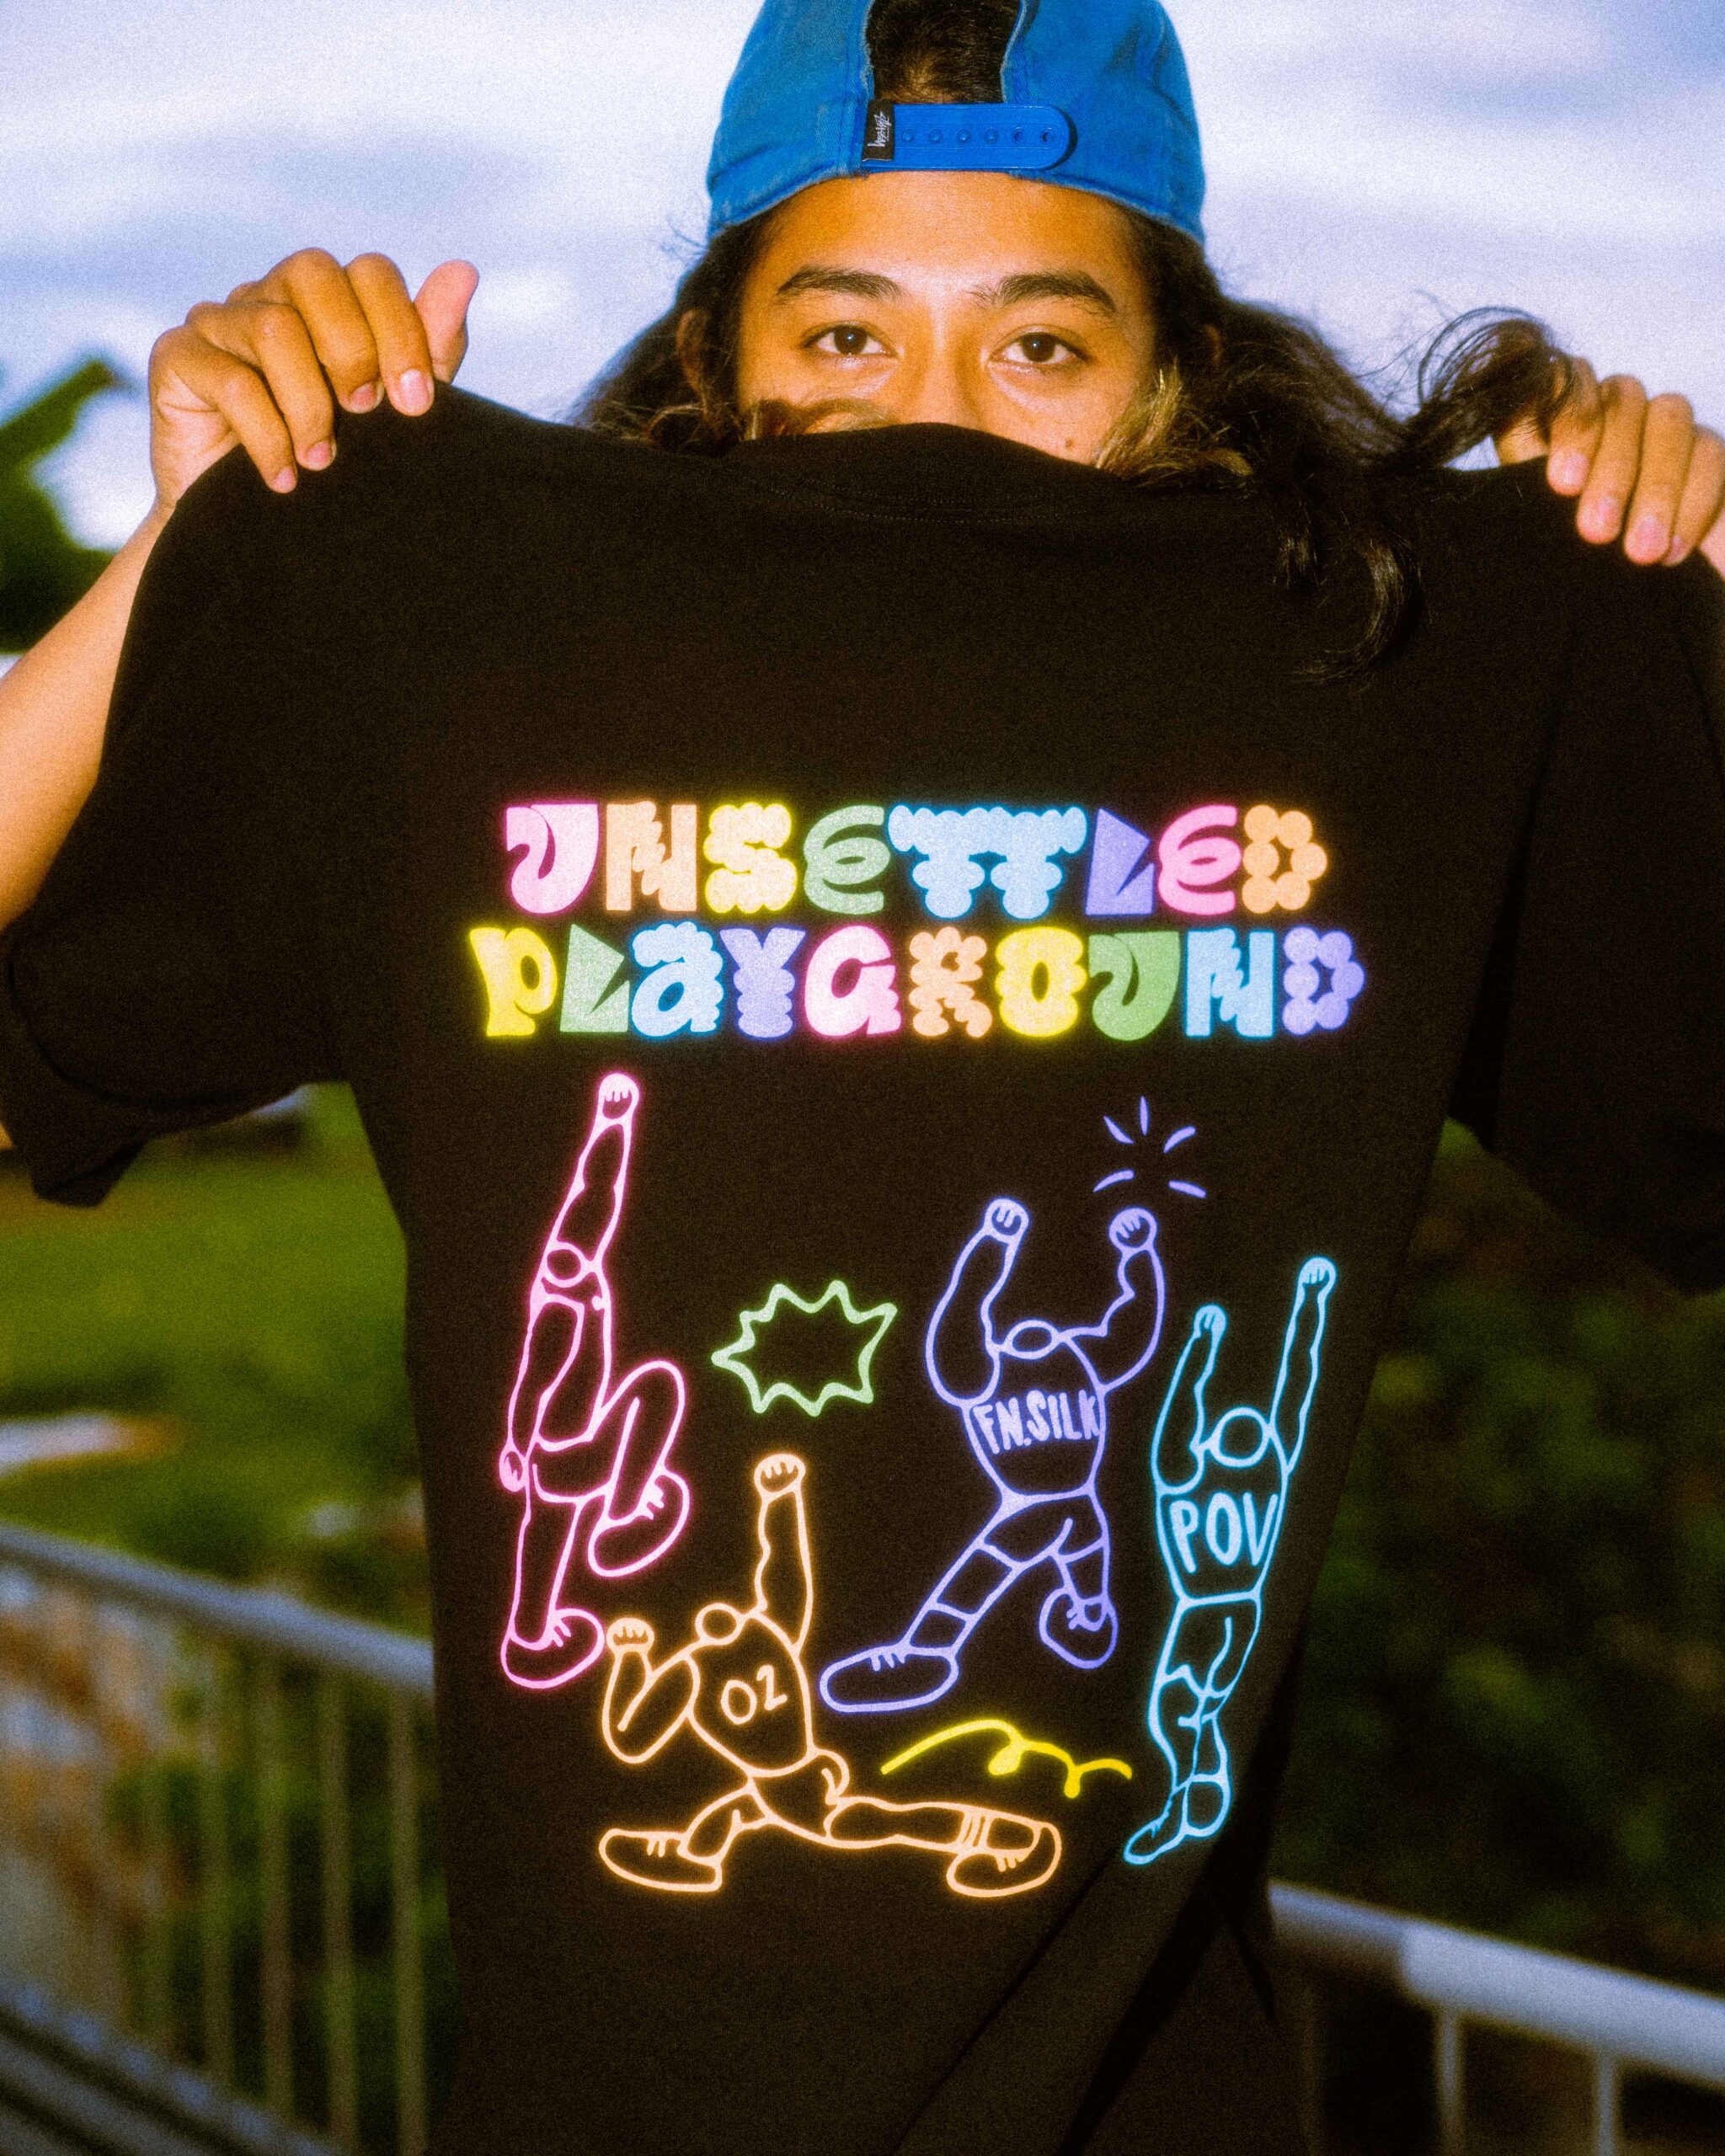 "Unsettled Playground" a New Capsule Collection Released by POV & FN Silk